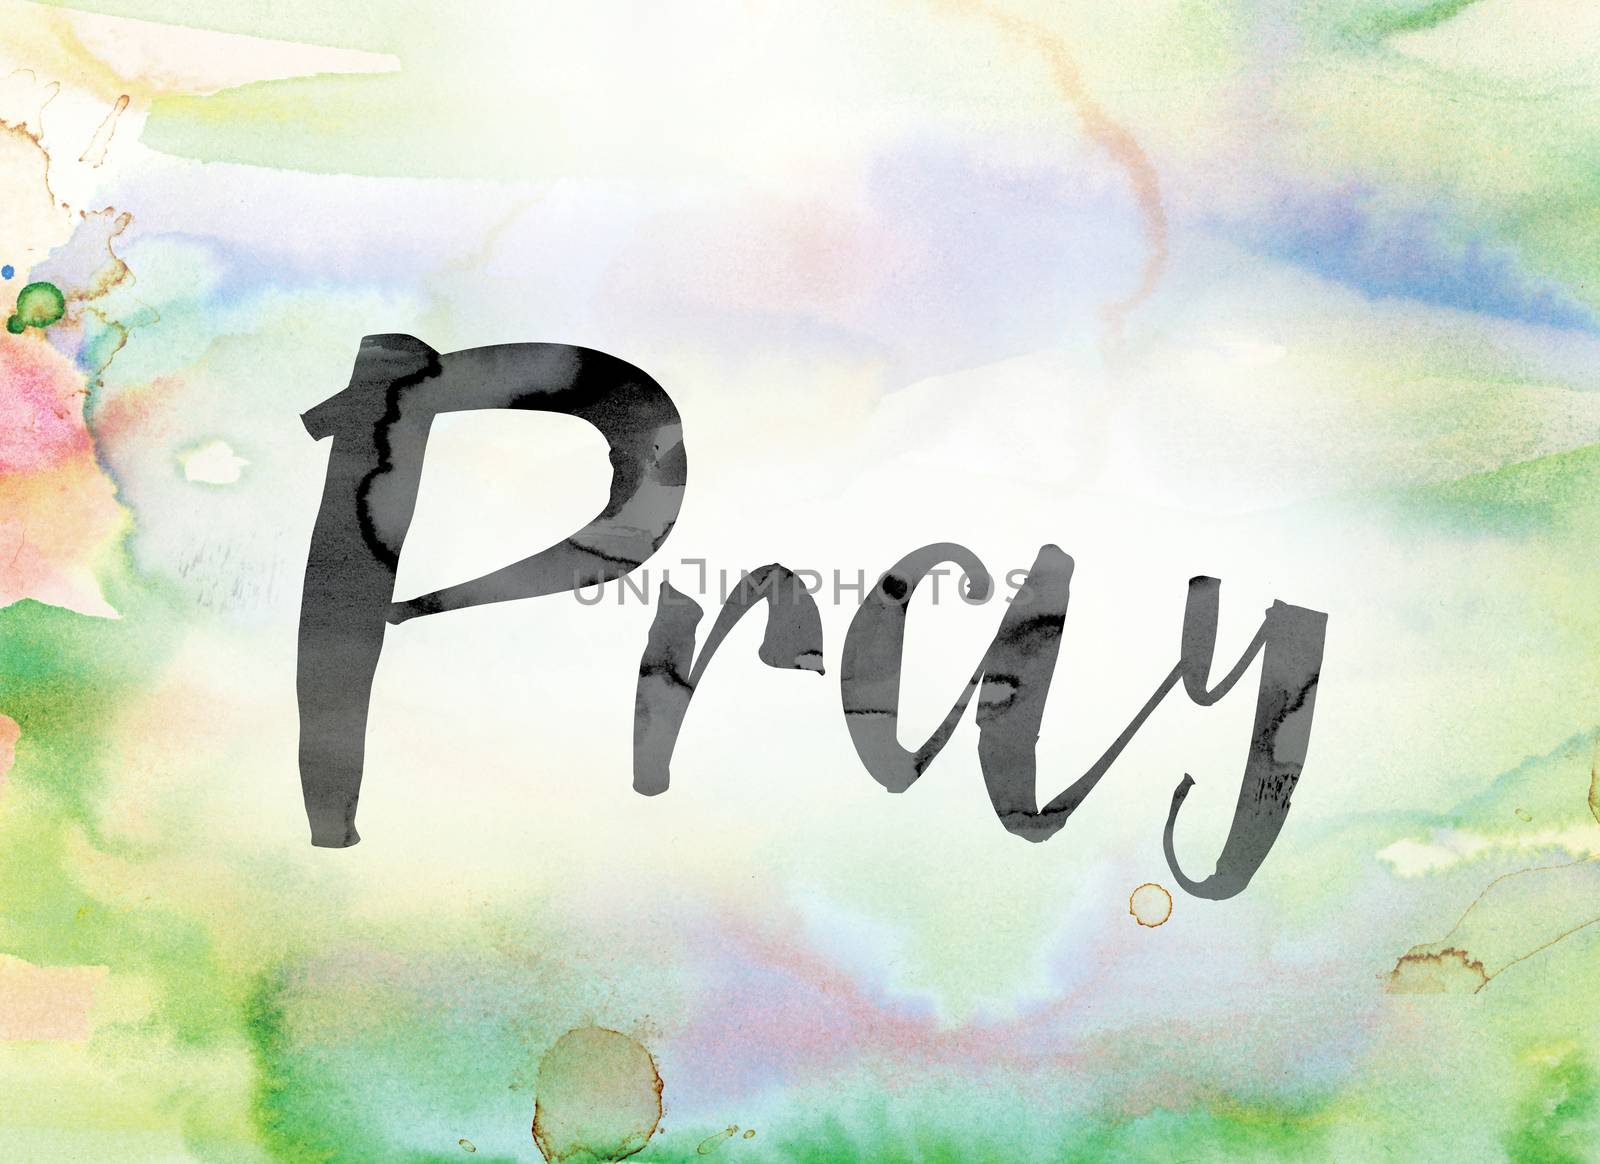 The word "Pray" painted in black ink over a colorful watercolor washed background concept and theme.